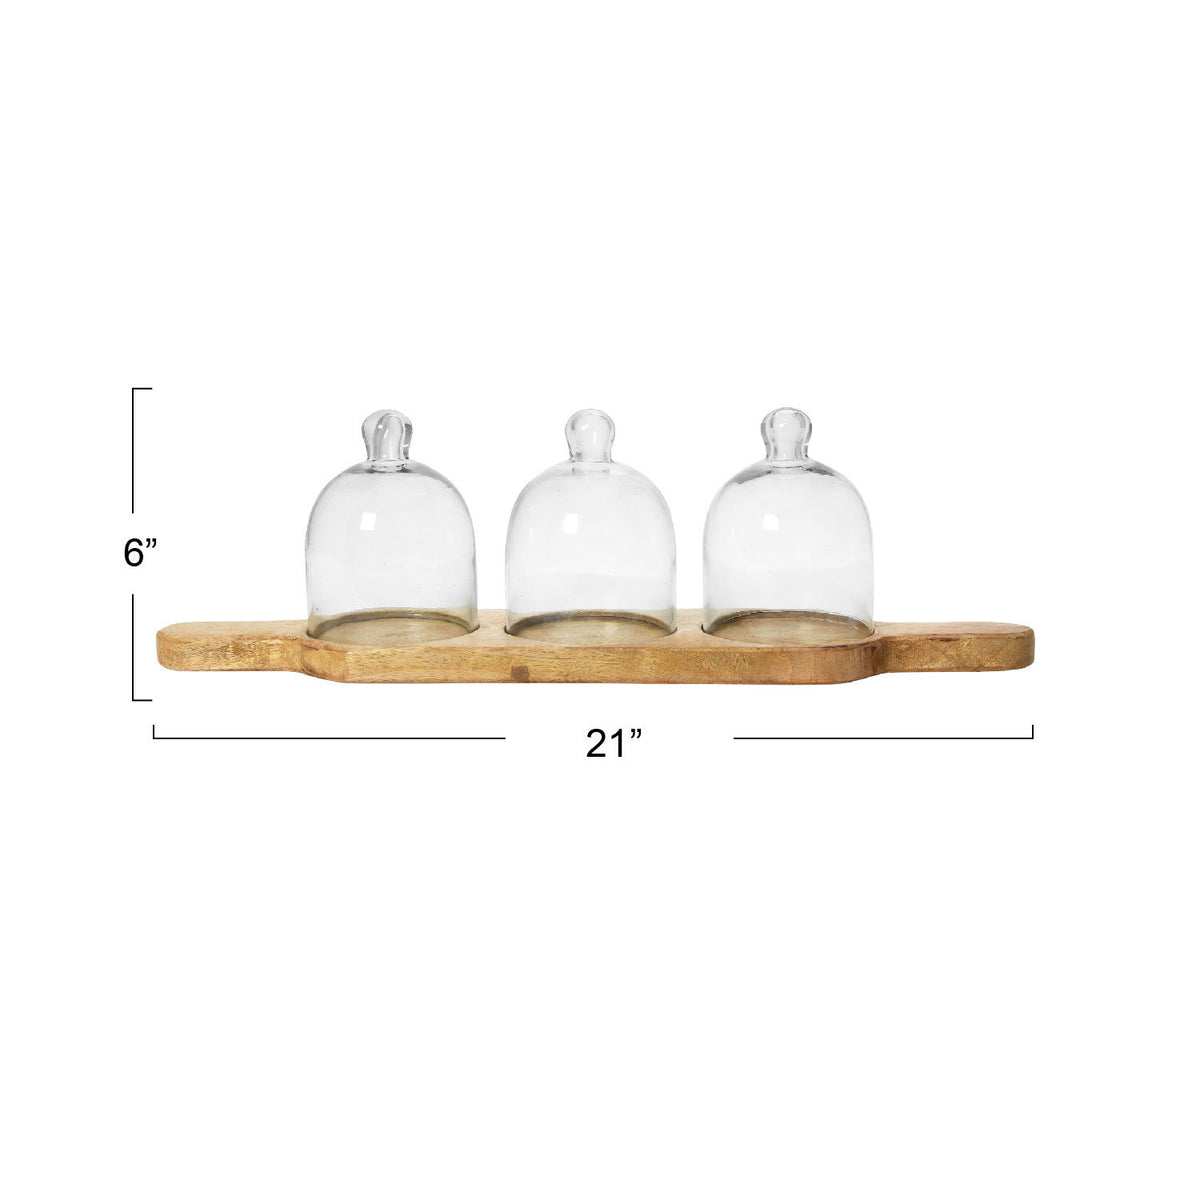 Mango Wood Serving Tray w/3 Glass Cloches